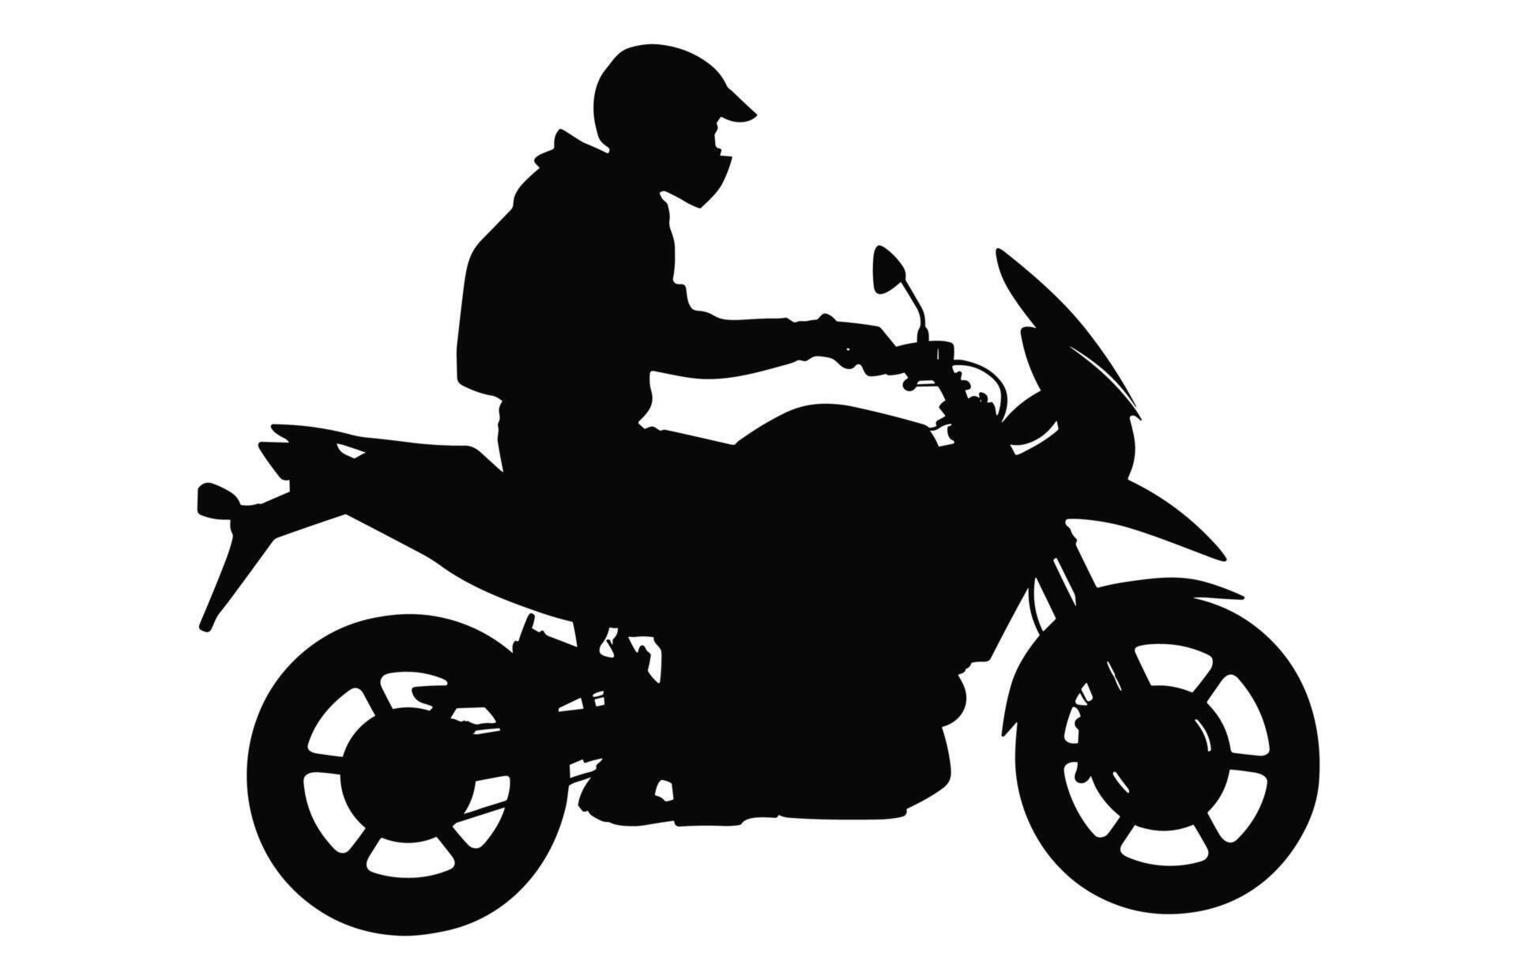 Man riding motorcycle silhouette vector black and white isolated on a white background